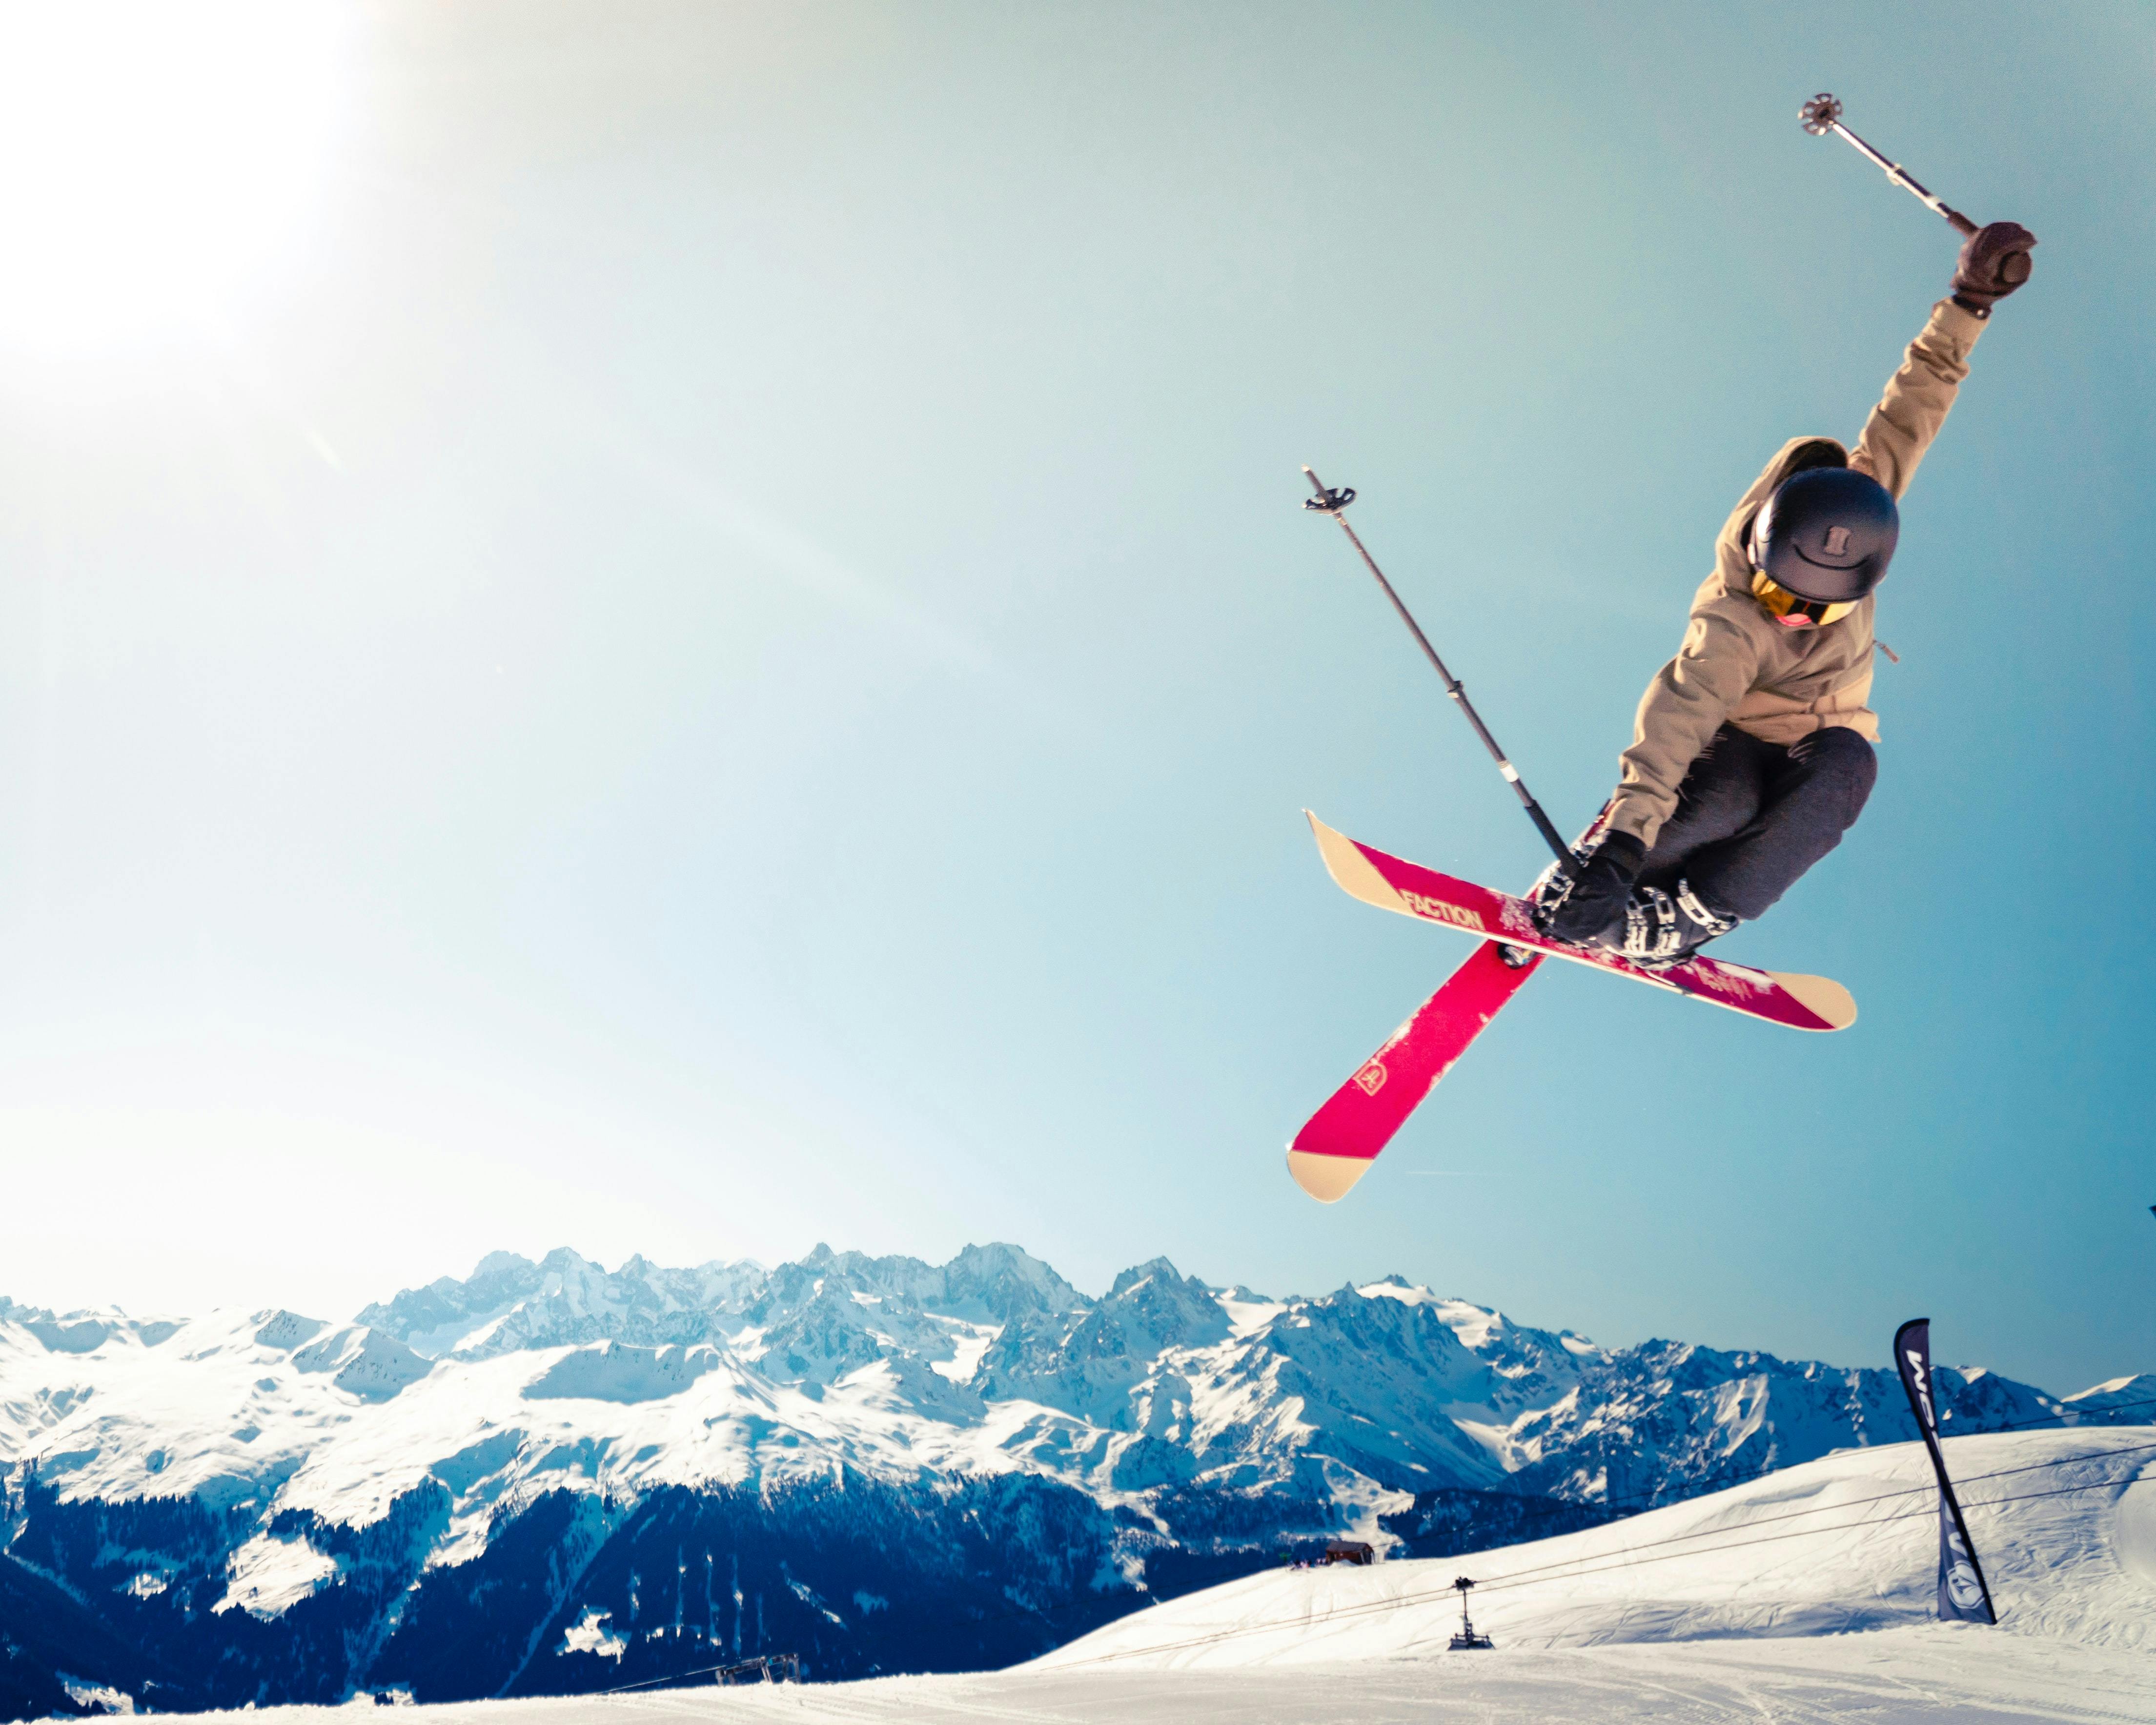 A skier flying through the air, arms outstretched and skis crossed in an epic trick - the sun blazing down on the mountains in the background.